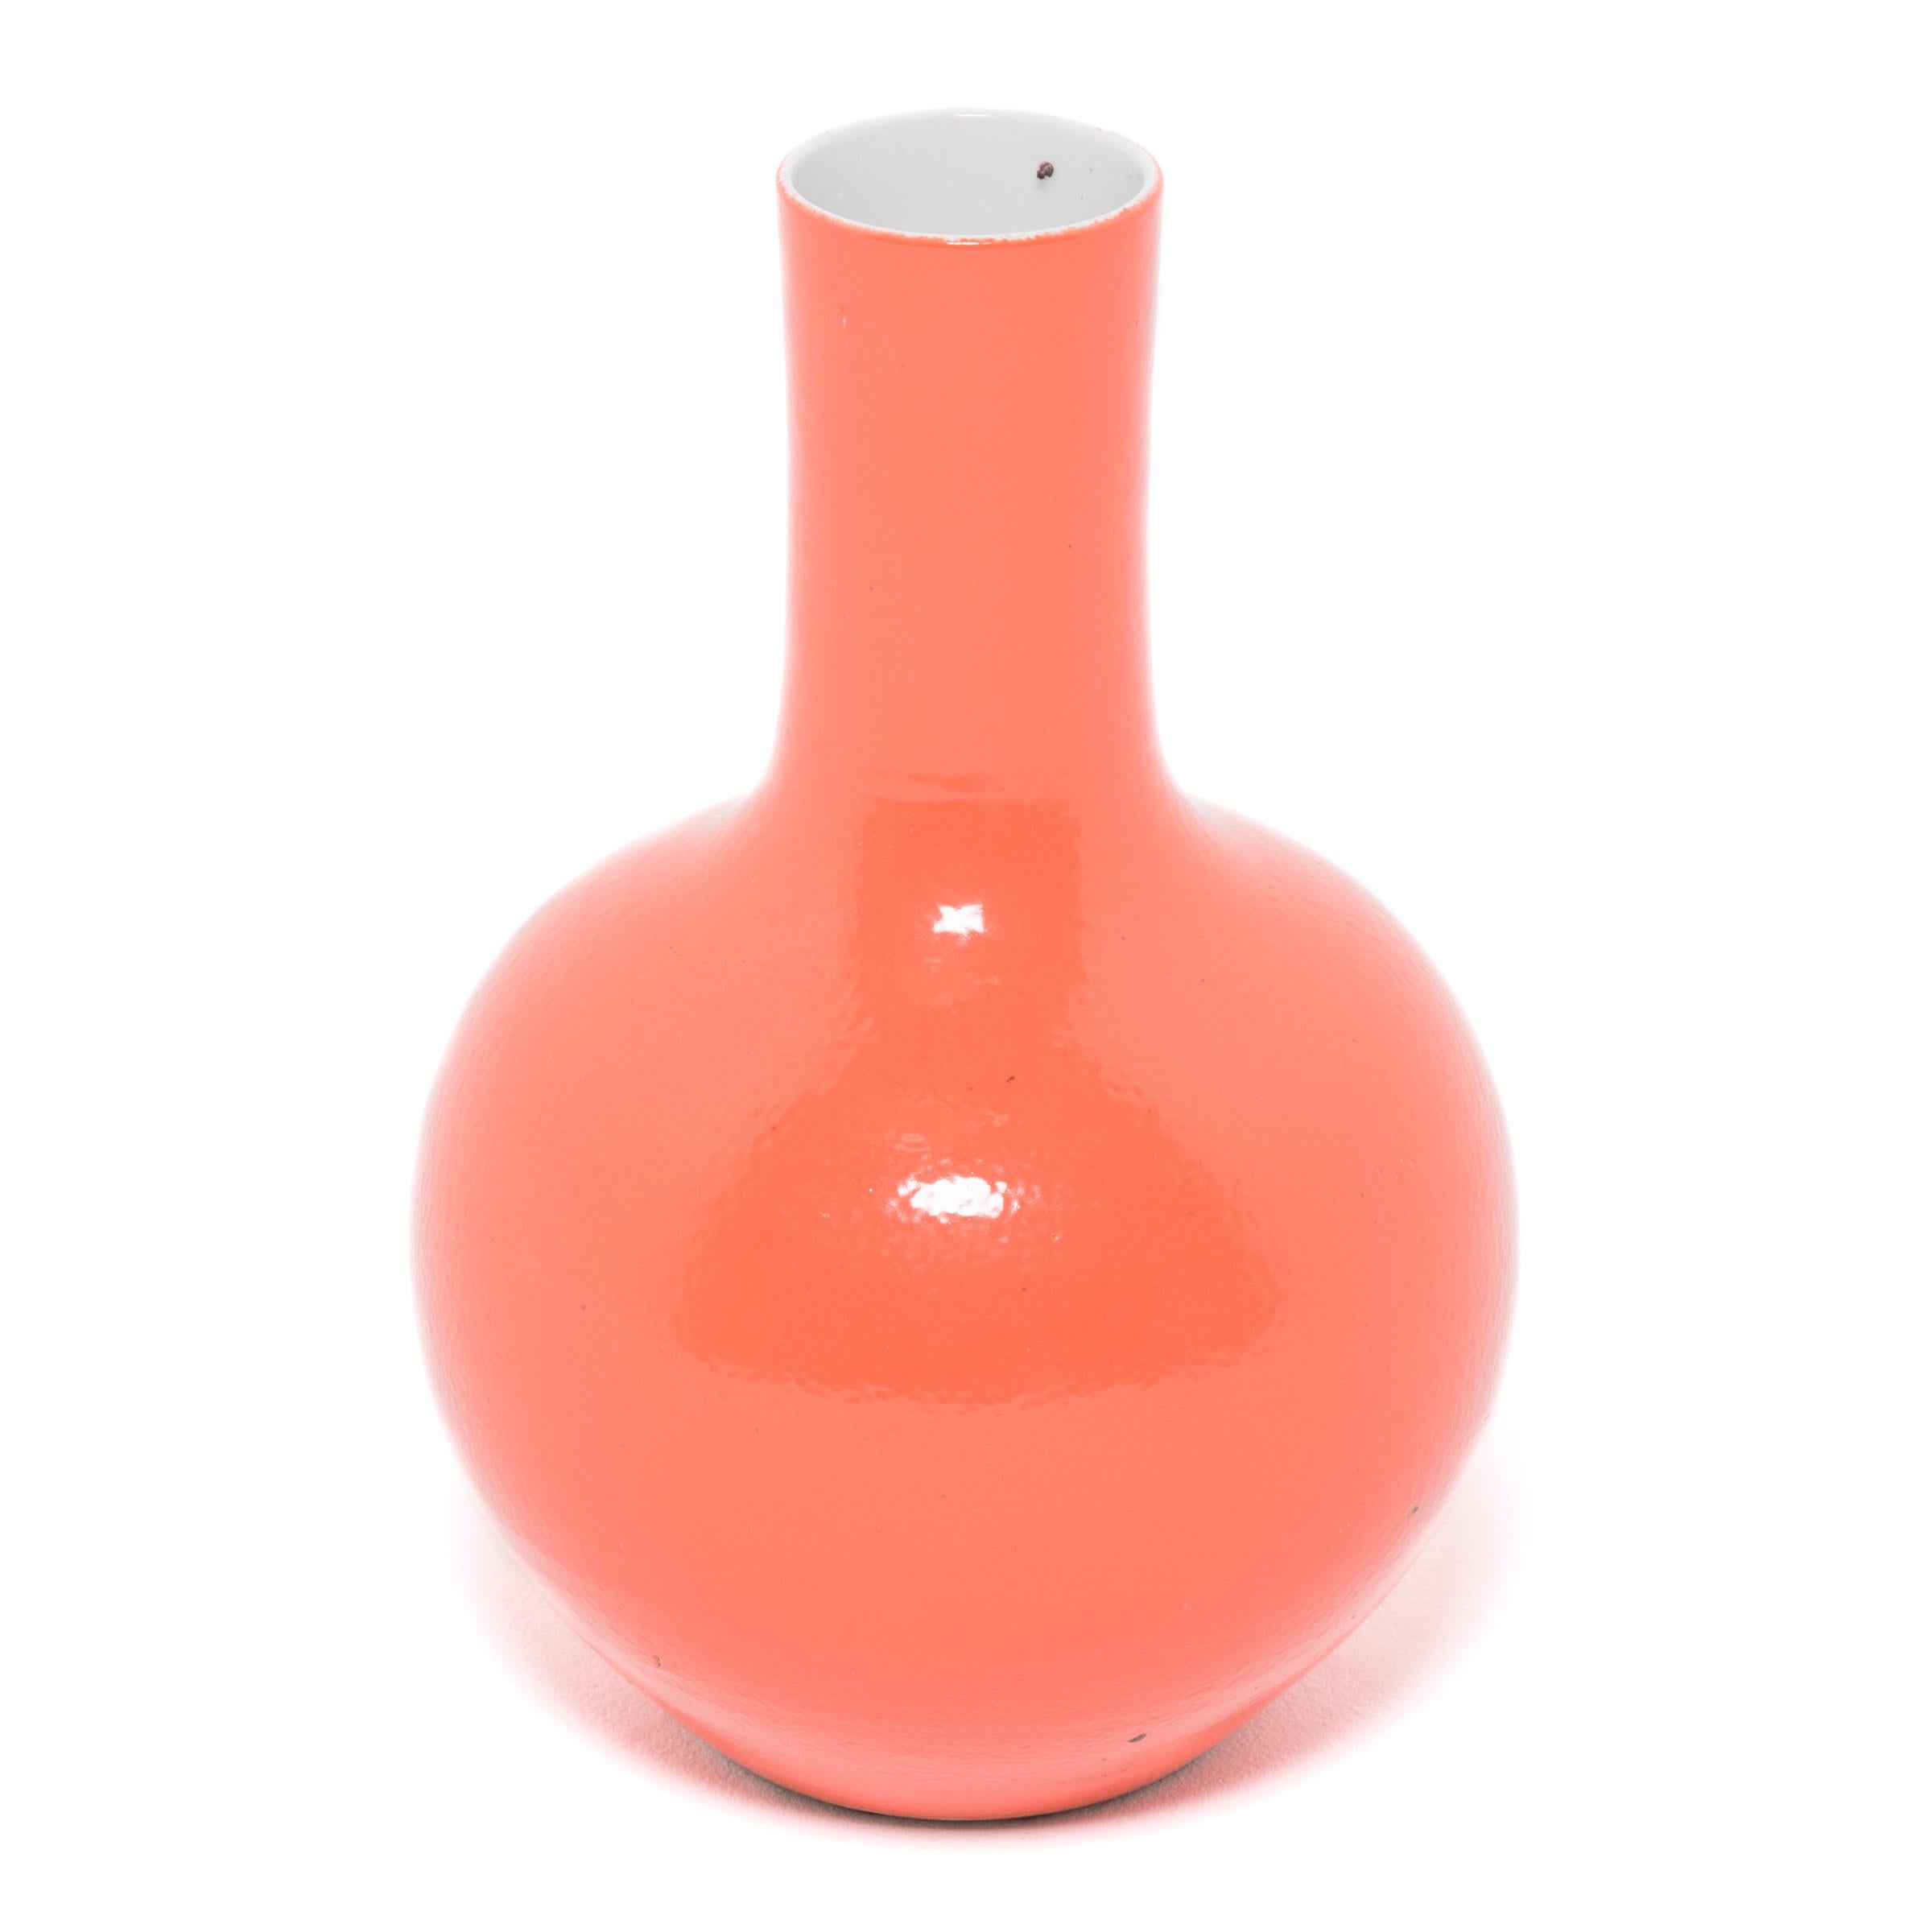 Drawing on a long Chinese tradition of ceramics, this striking long-necked vase is cloaked in an all-over persimmon-orange glaze. With a rounded, globular body and cylindrical neck, the large vase reinterprets the traditional gooseneck shape known